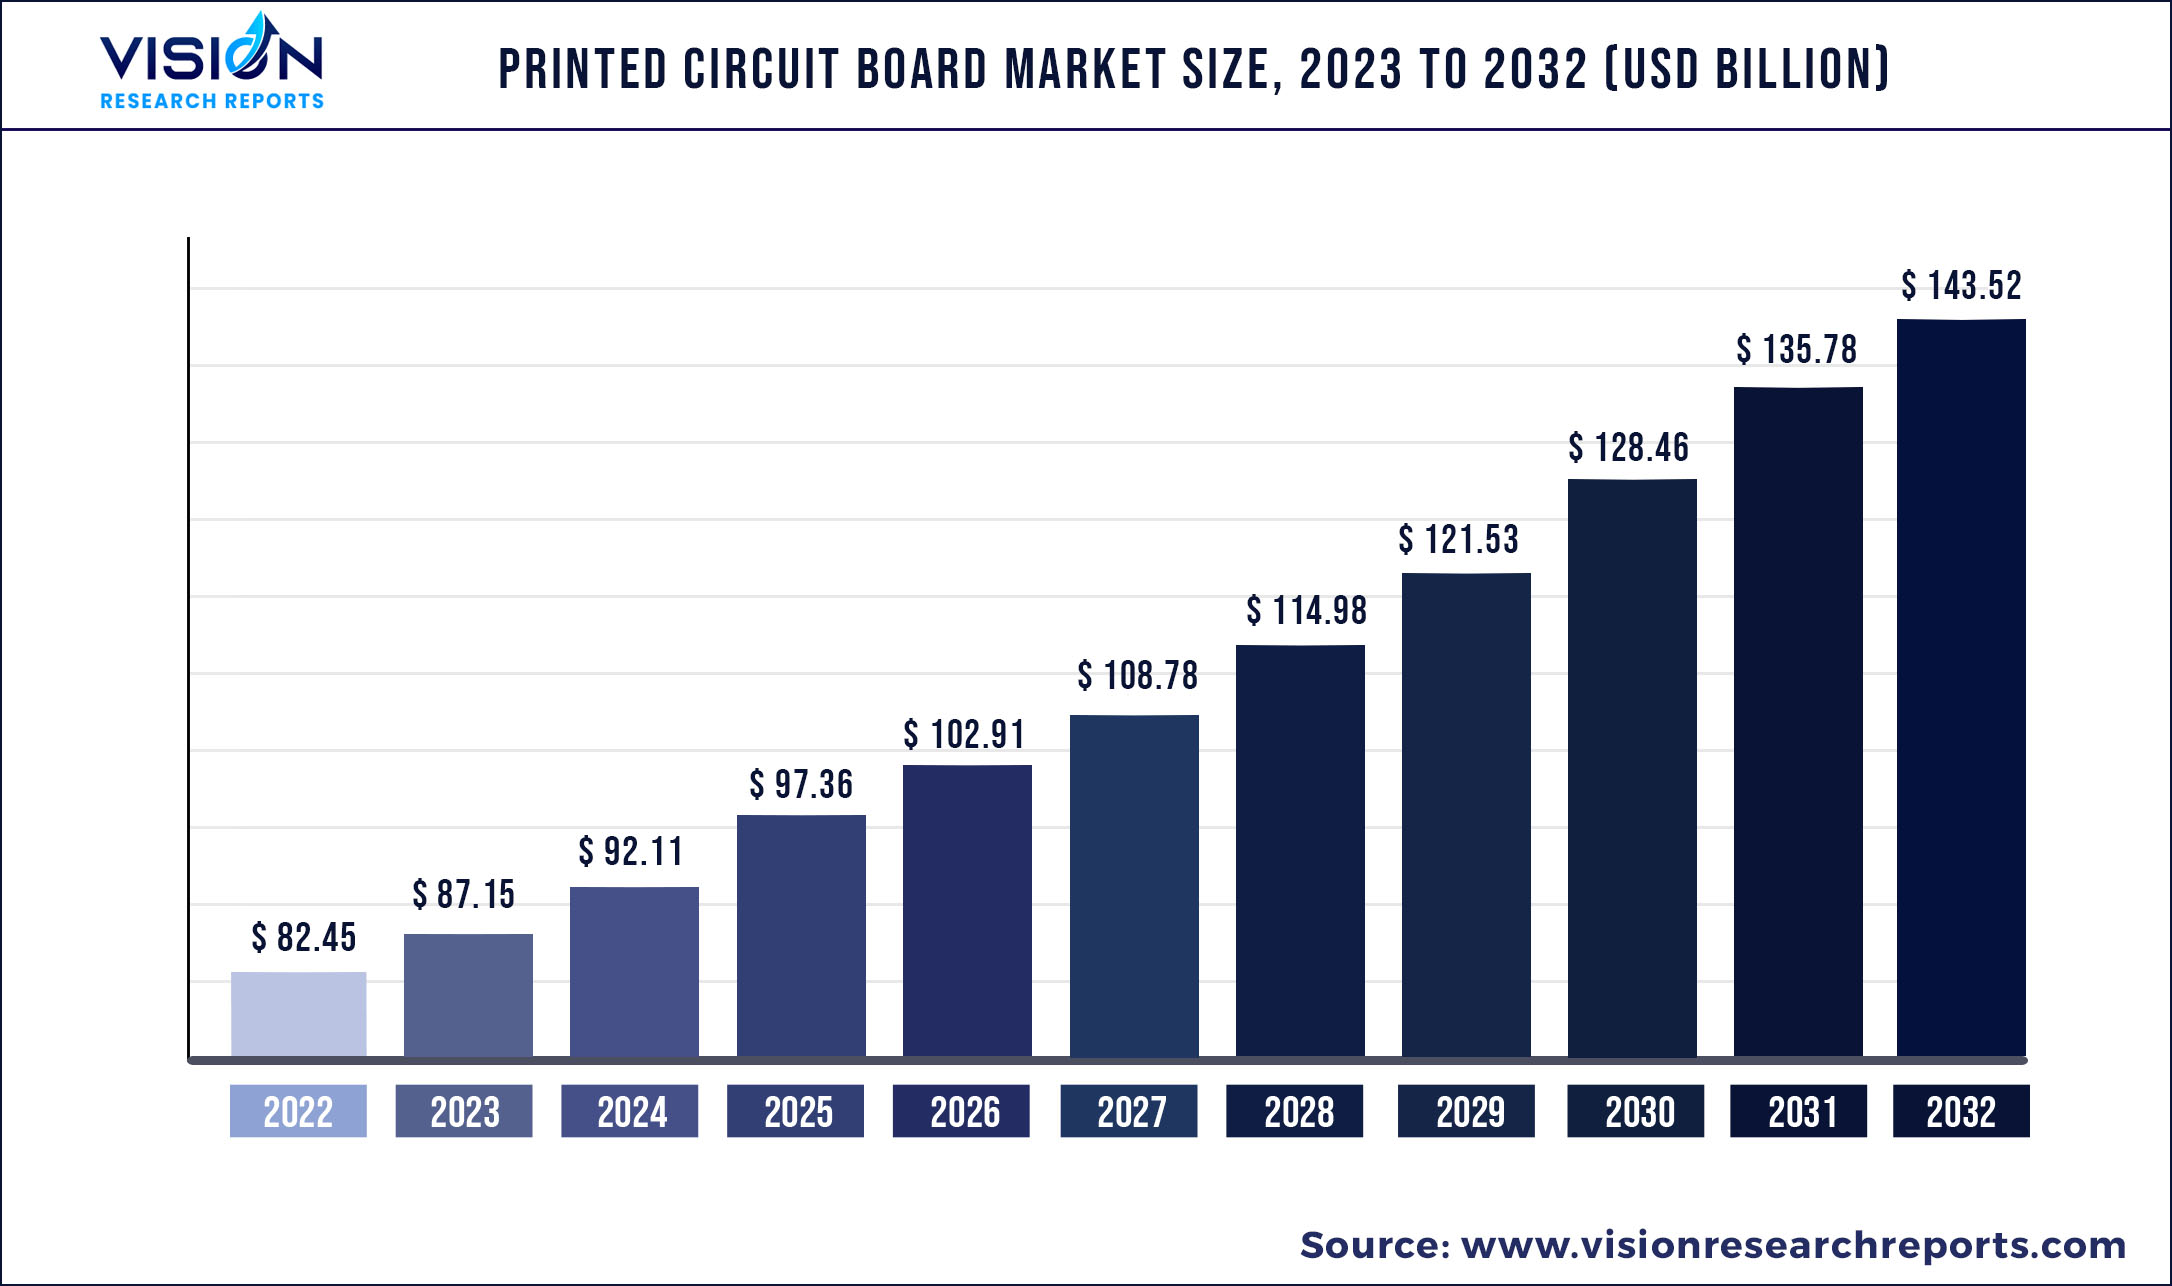 Printed Circuit Board Market Size 2023 to 2032